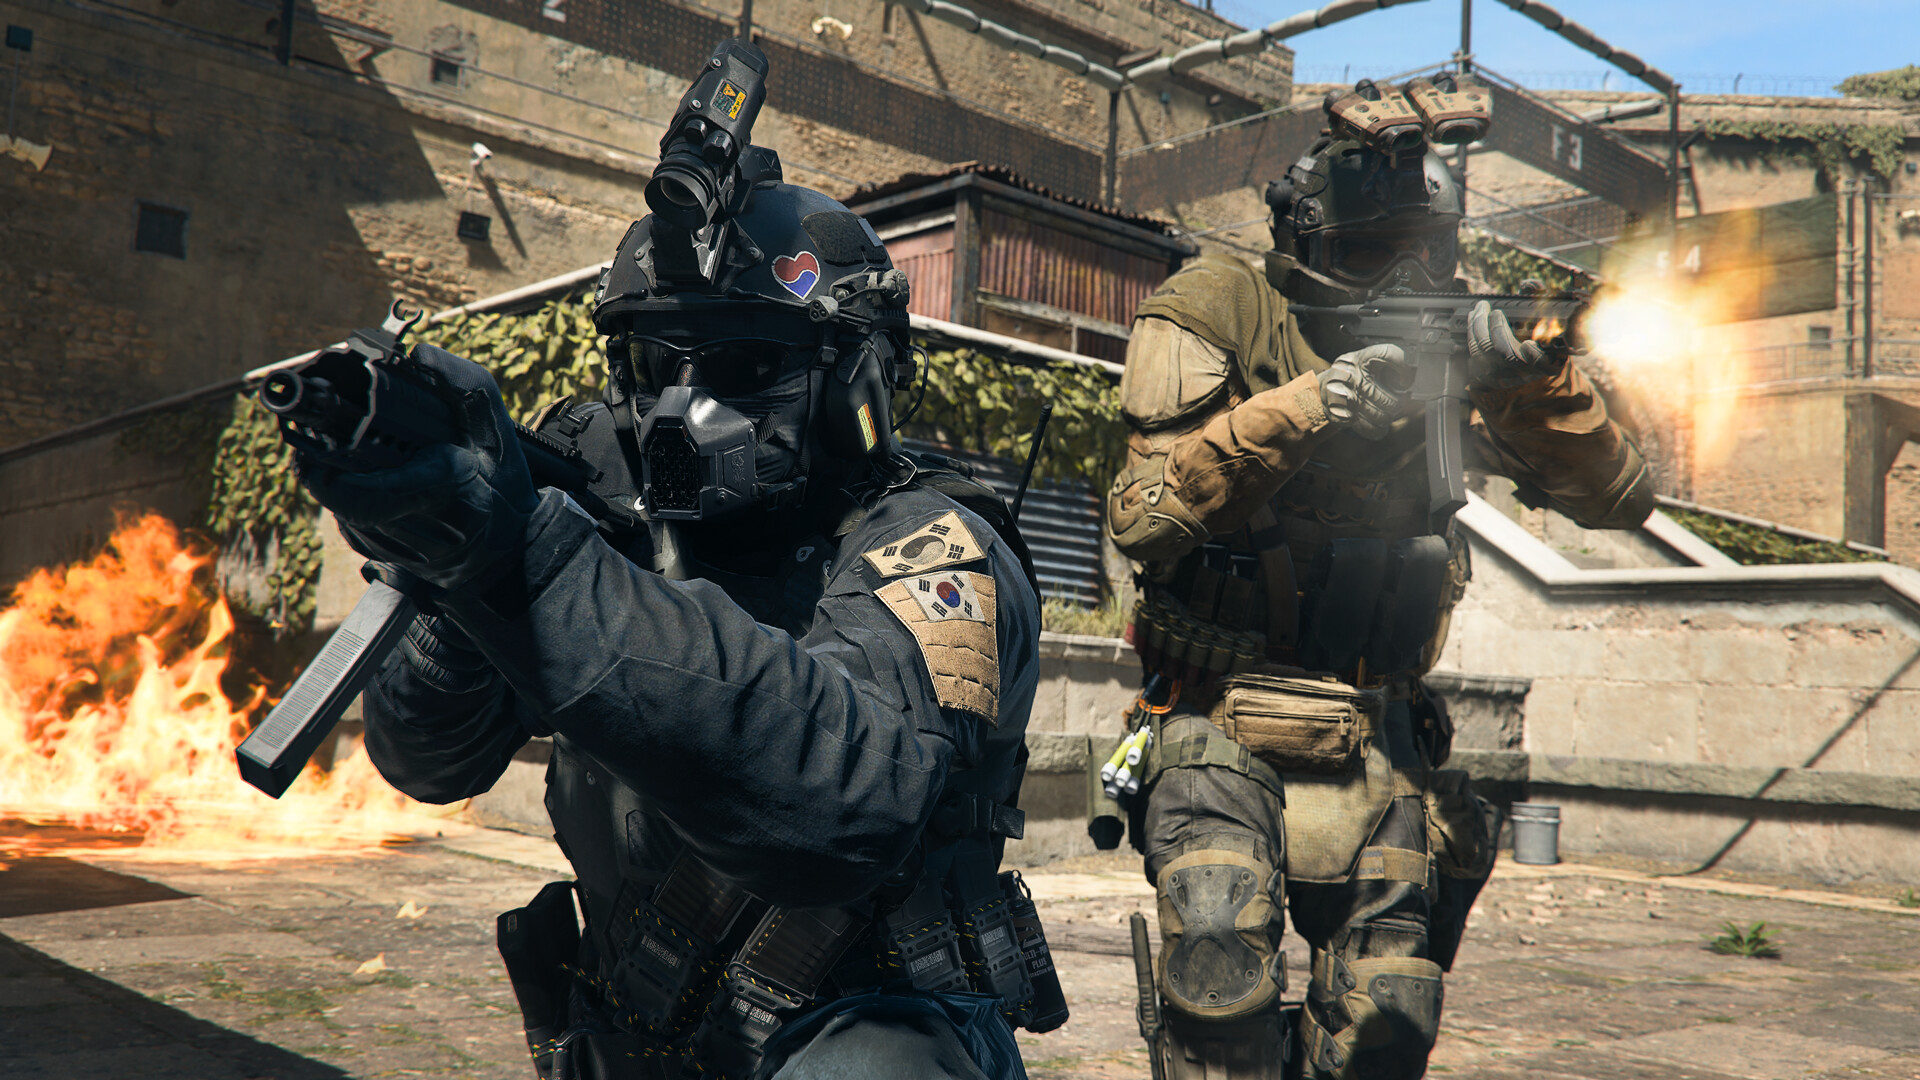 CoD Warzone 2.0 gives it all during Summer Game Fest with the first